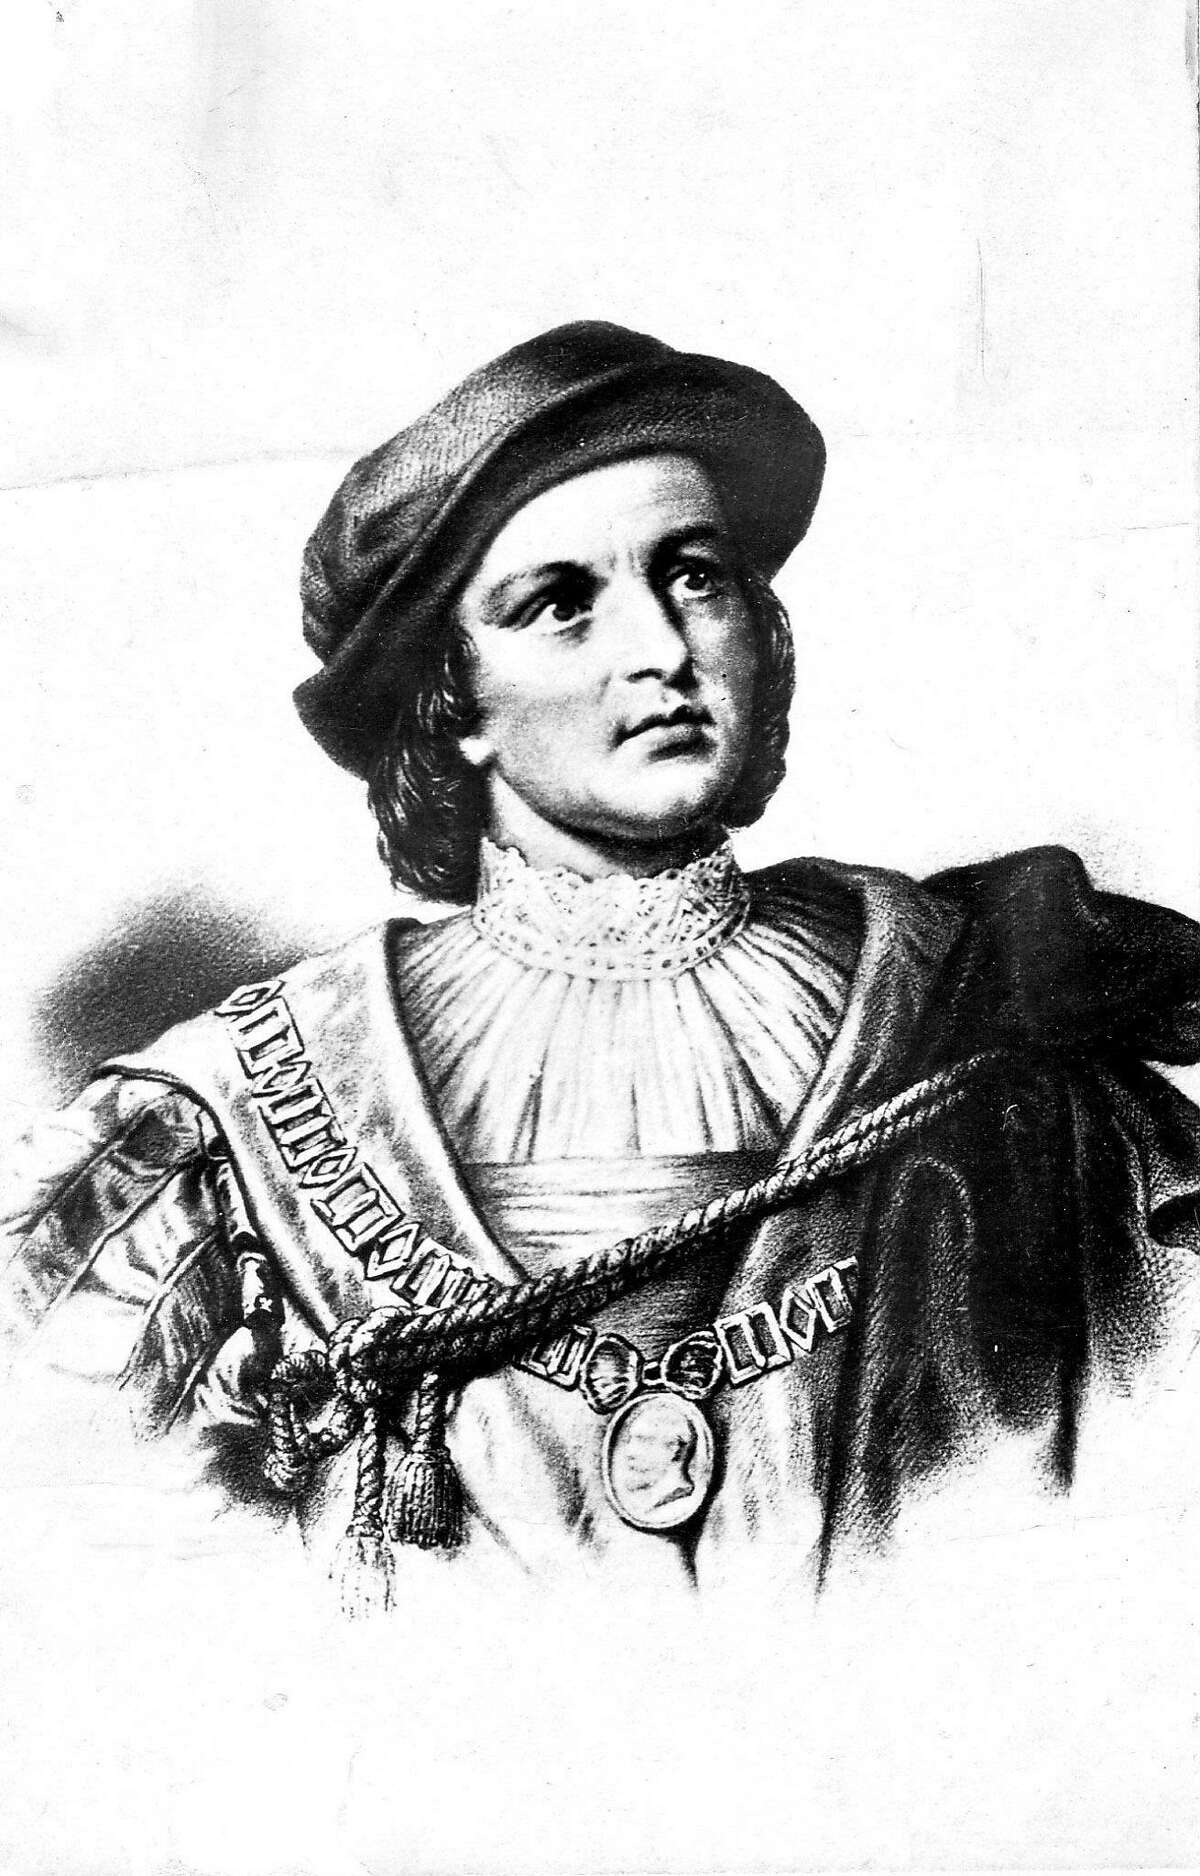 Christopher Columbus, illustration (unknown artist) (date unknown) On April 17, 1492, Columbus signed a contract with a representative of Spain's King Ferdinand and Queen Isabella, giving Columbus a commission to seek a westward ocean passage to Asia. CREDIT: FILE PHOTO